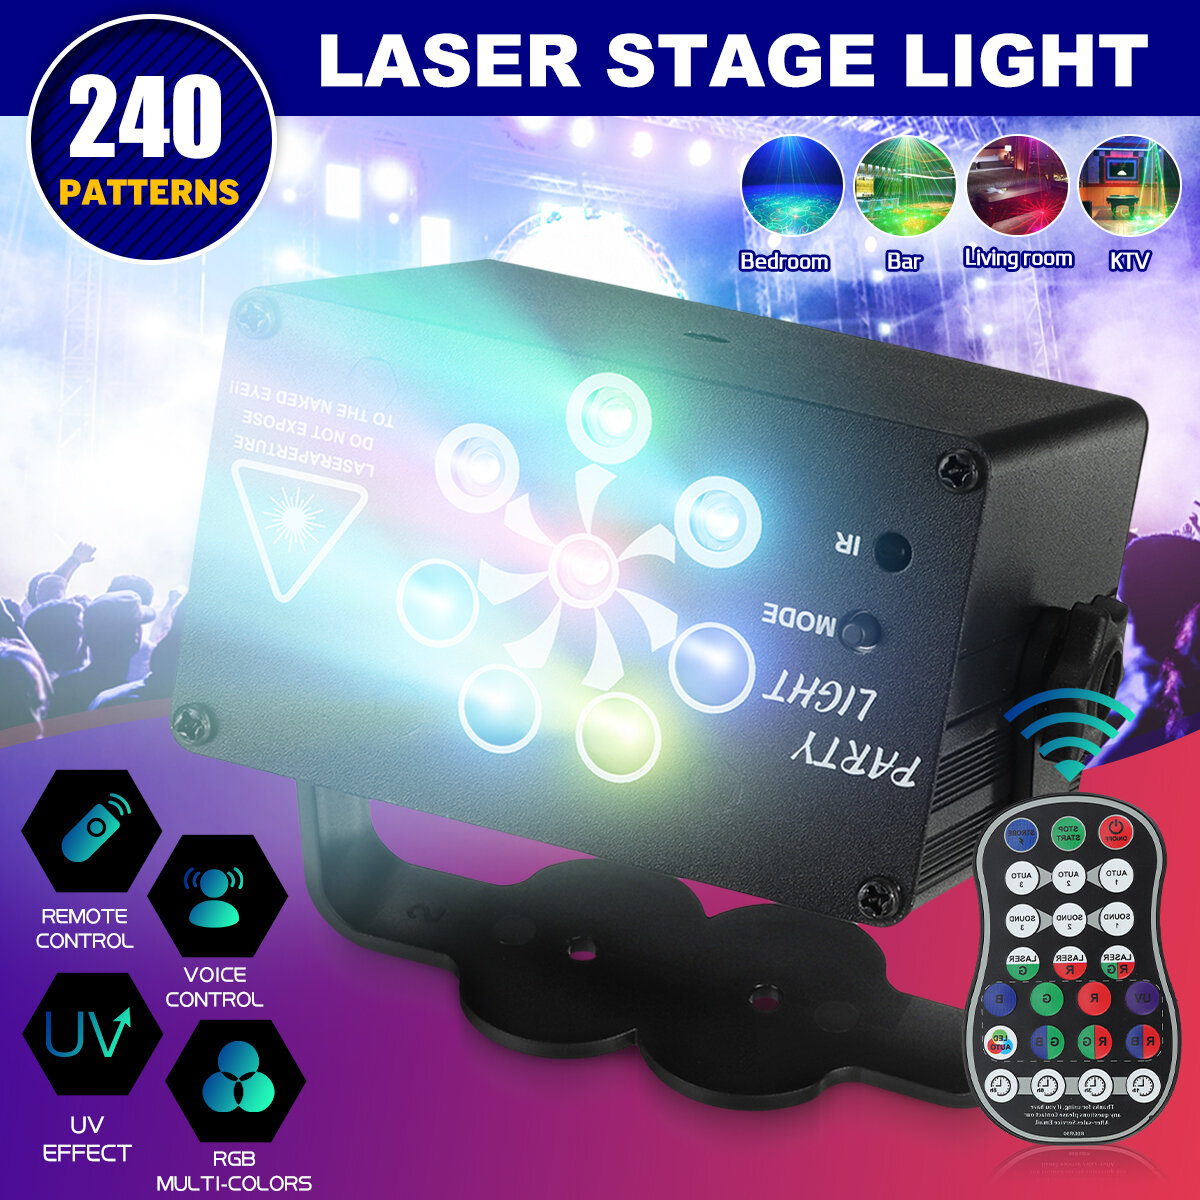 

Wireless 240 Patterns Laser Stage Light RGB LED USB Projector Party KTV DJ Disco Lamp Party Lights Voice + Remote Contro